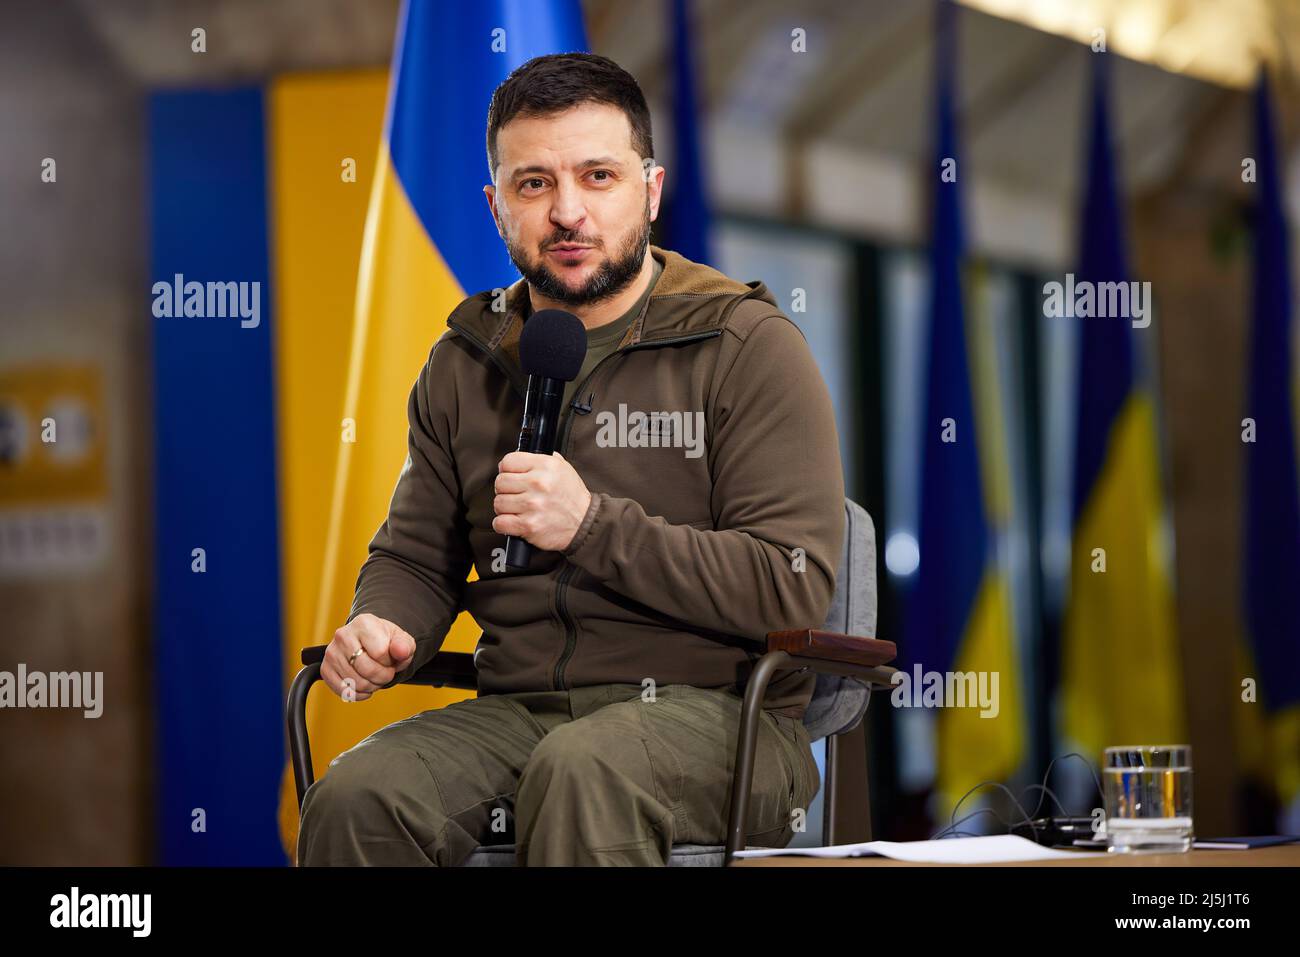 Ukraine President Volodymyr Zelensky holds a two hour long press conference for the international media in a Kyiv, Ukraine subway station. Stock Photo